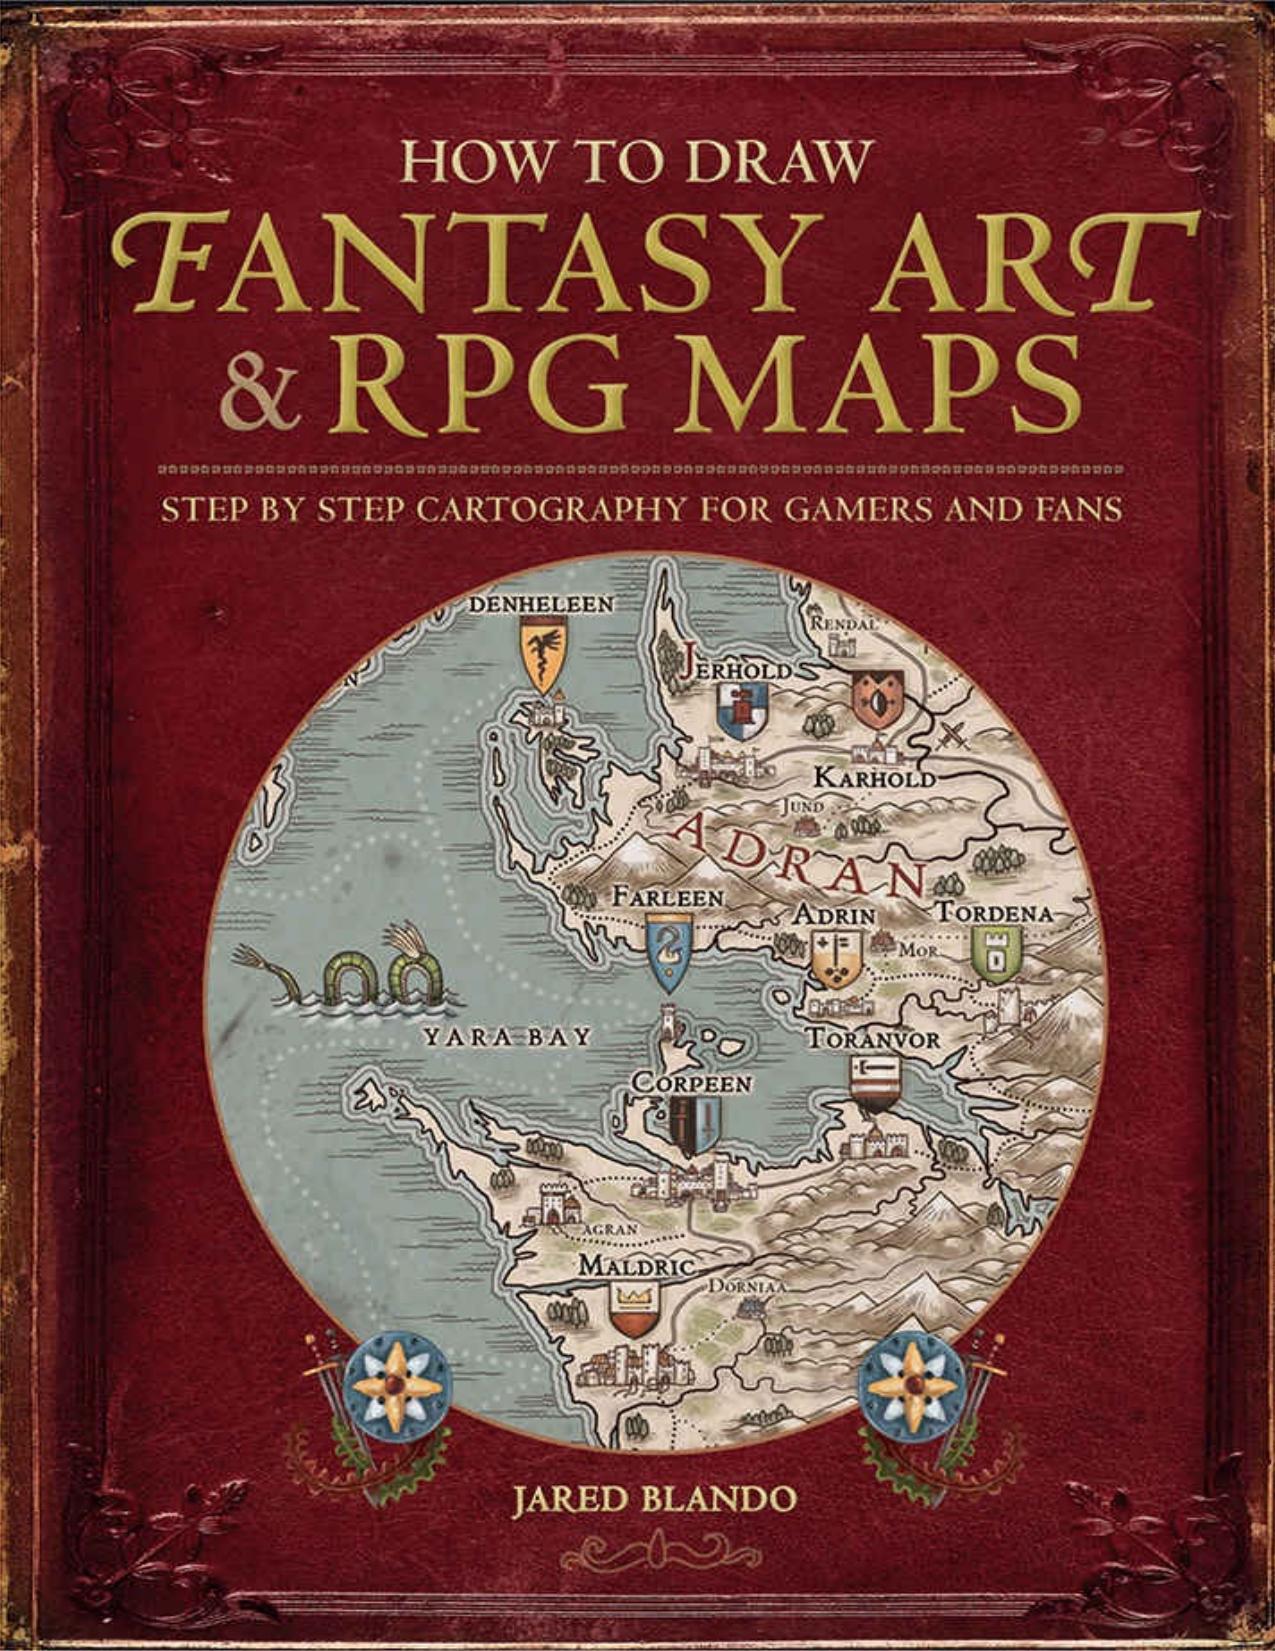 How to Draw Fantasy Art and RPG Maps: Step by Step Cartography for Gamers and Fans - PDFDrive.com